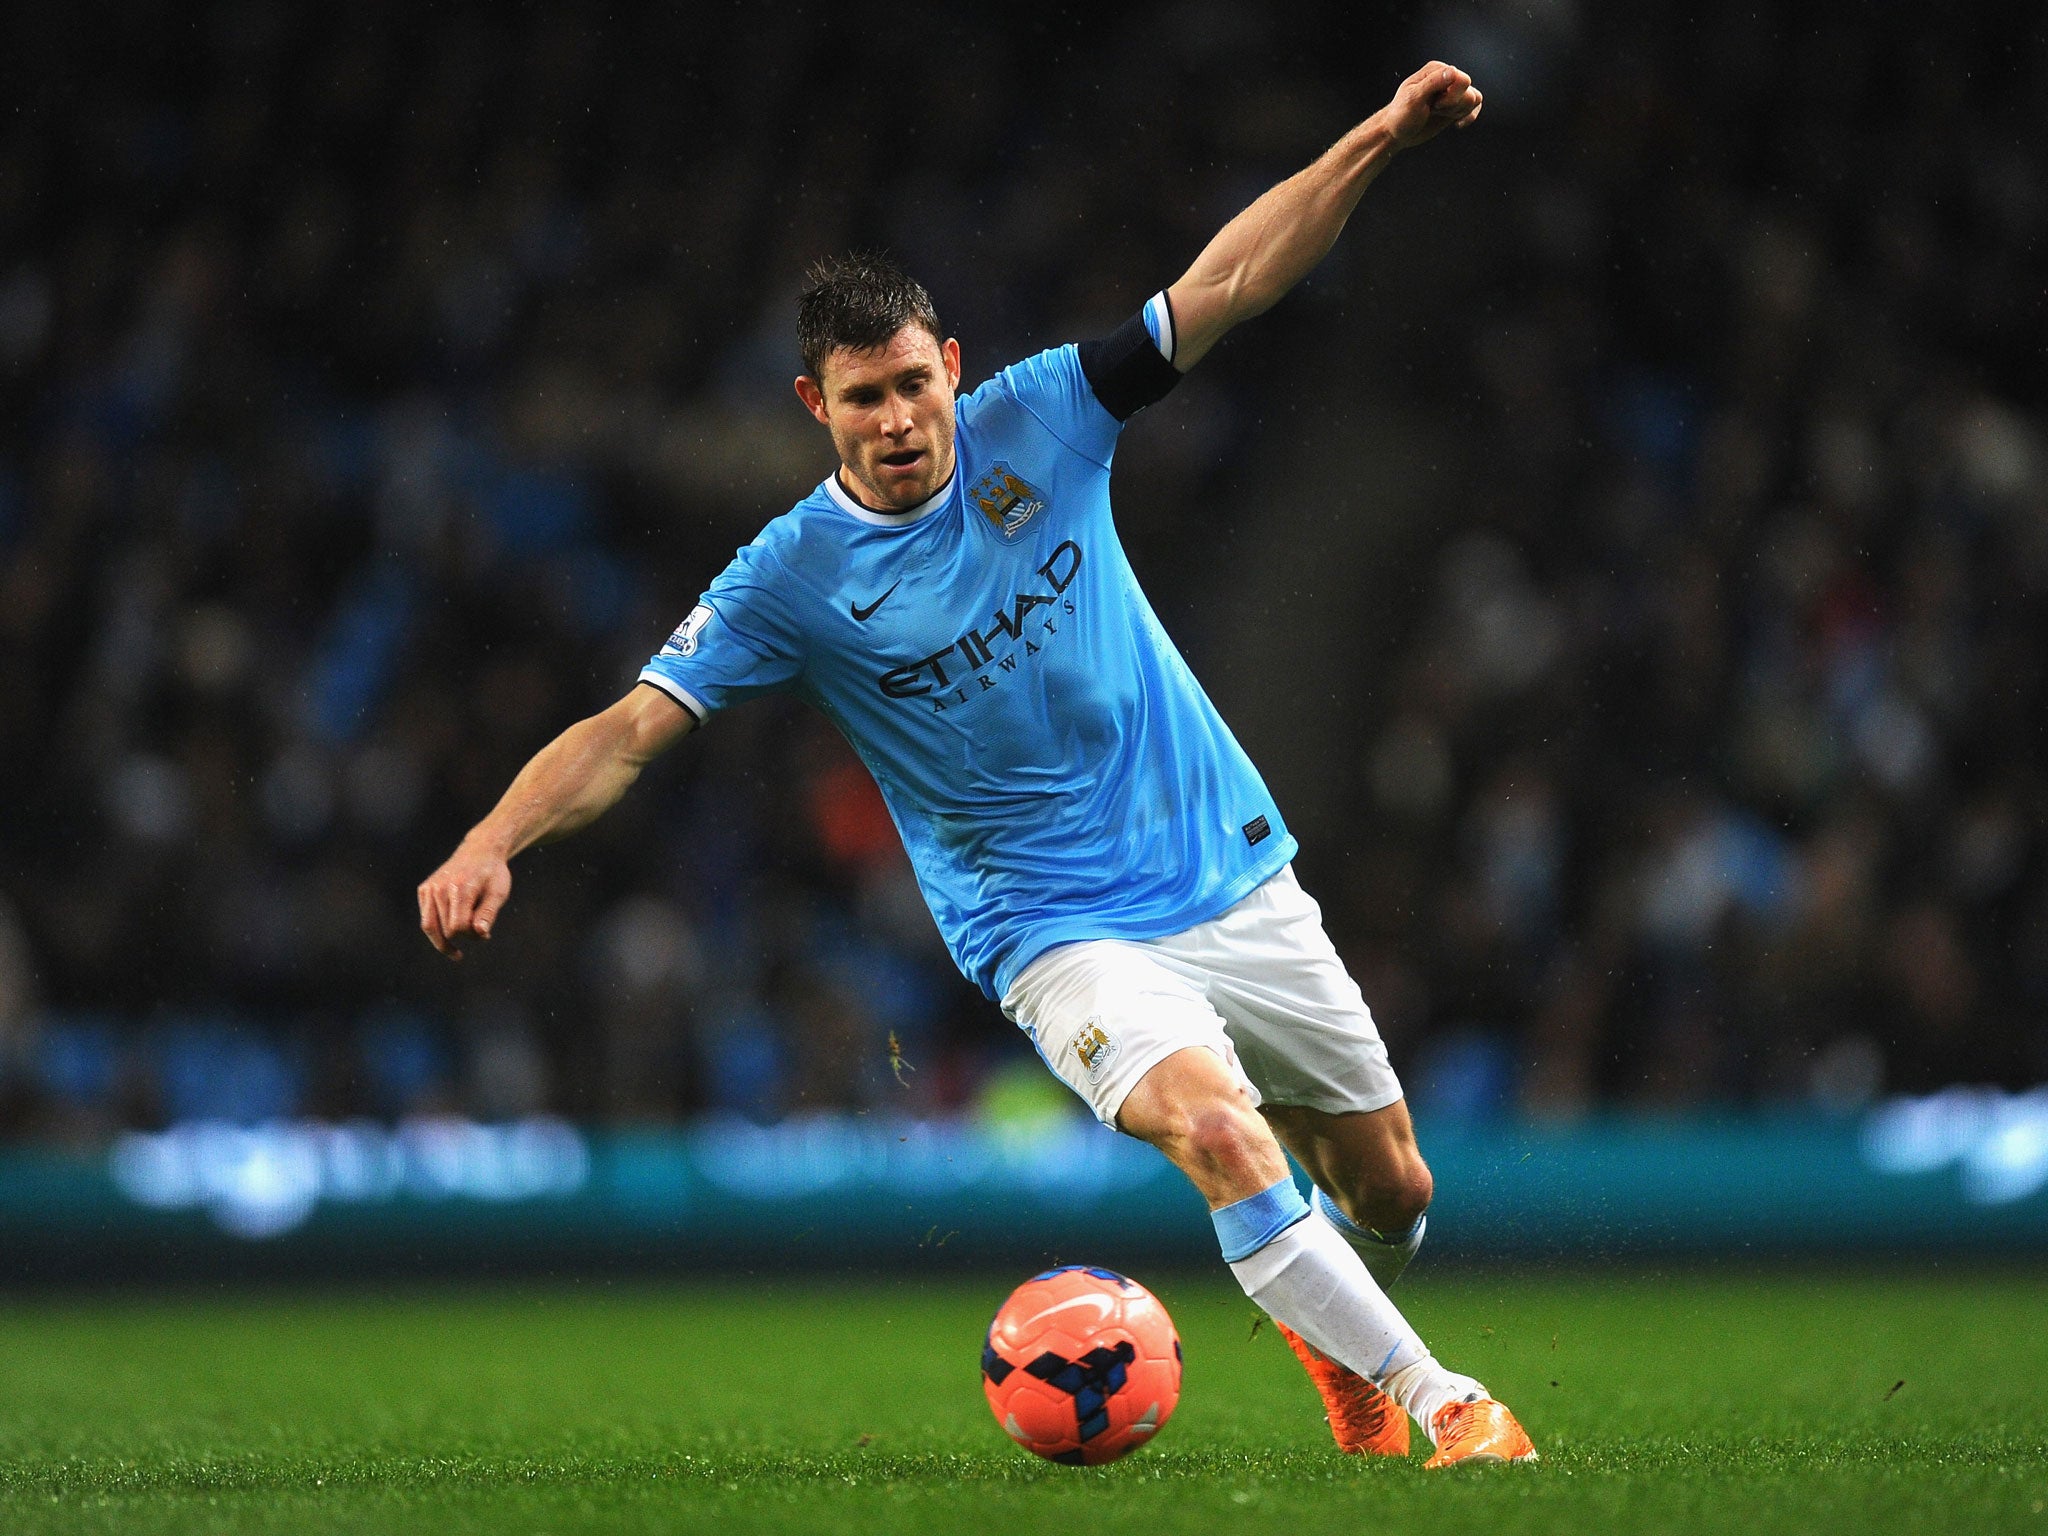 James Milner looks set to leave Manchester City this summer